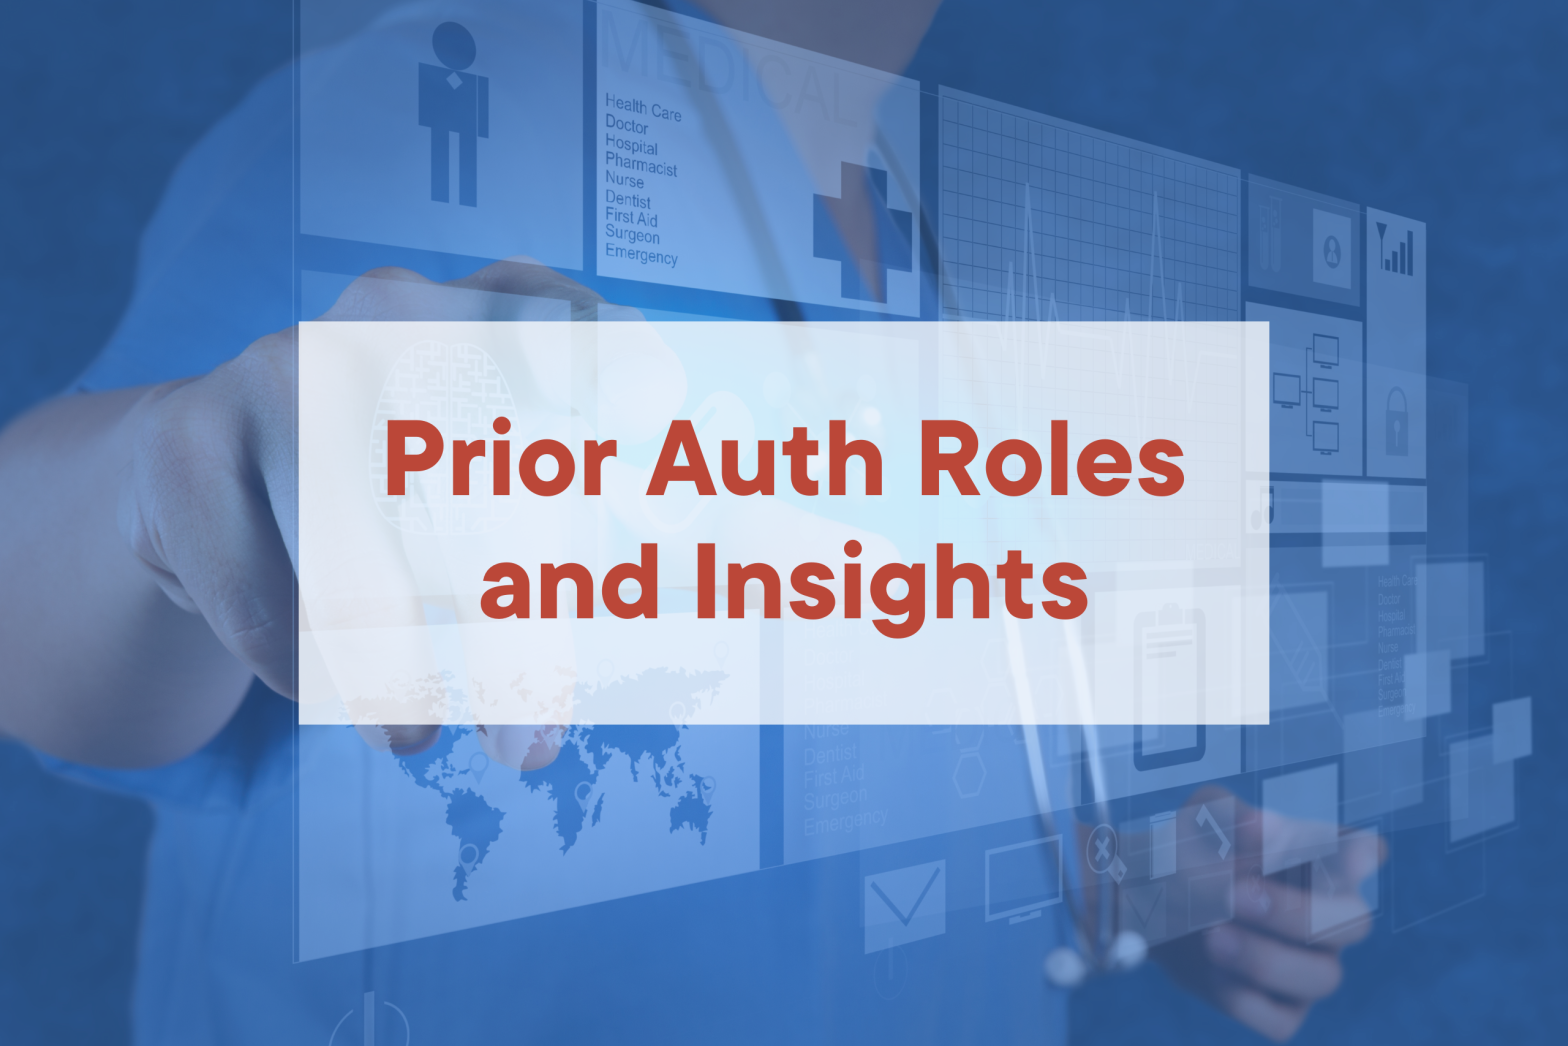 Prior Auth Roles and Insights